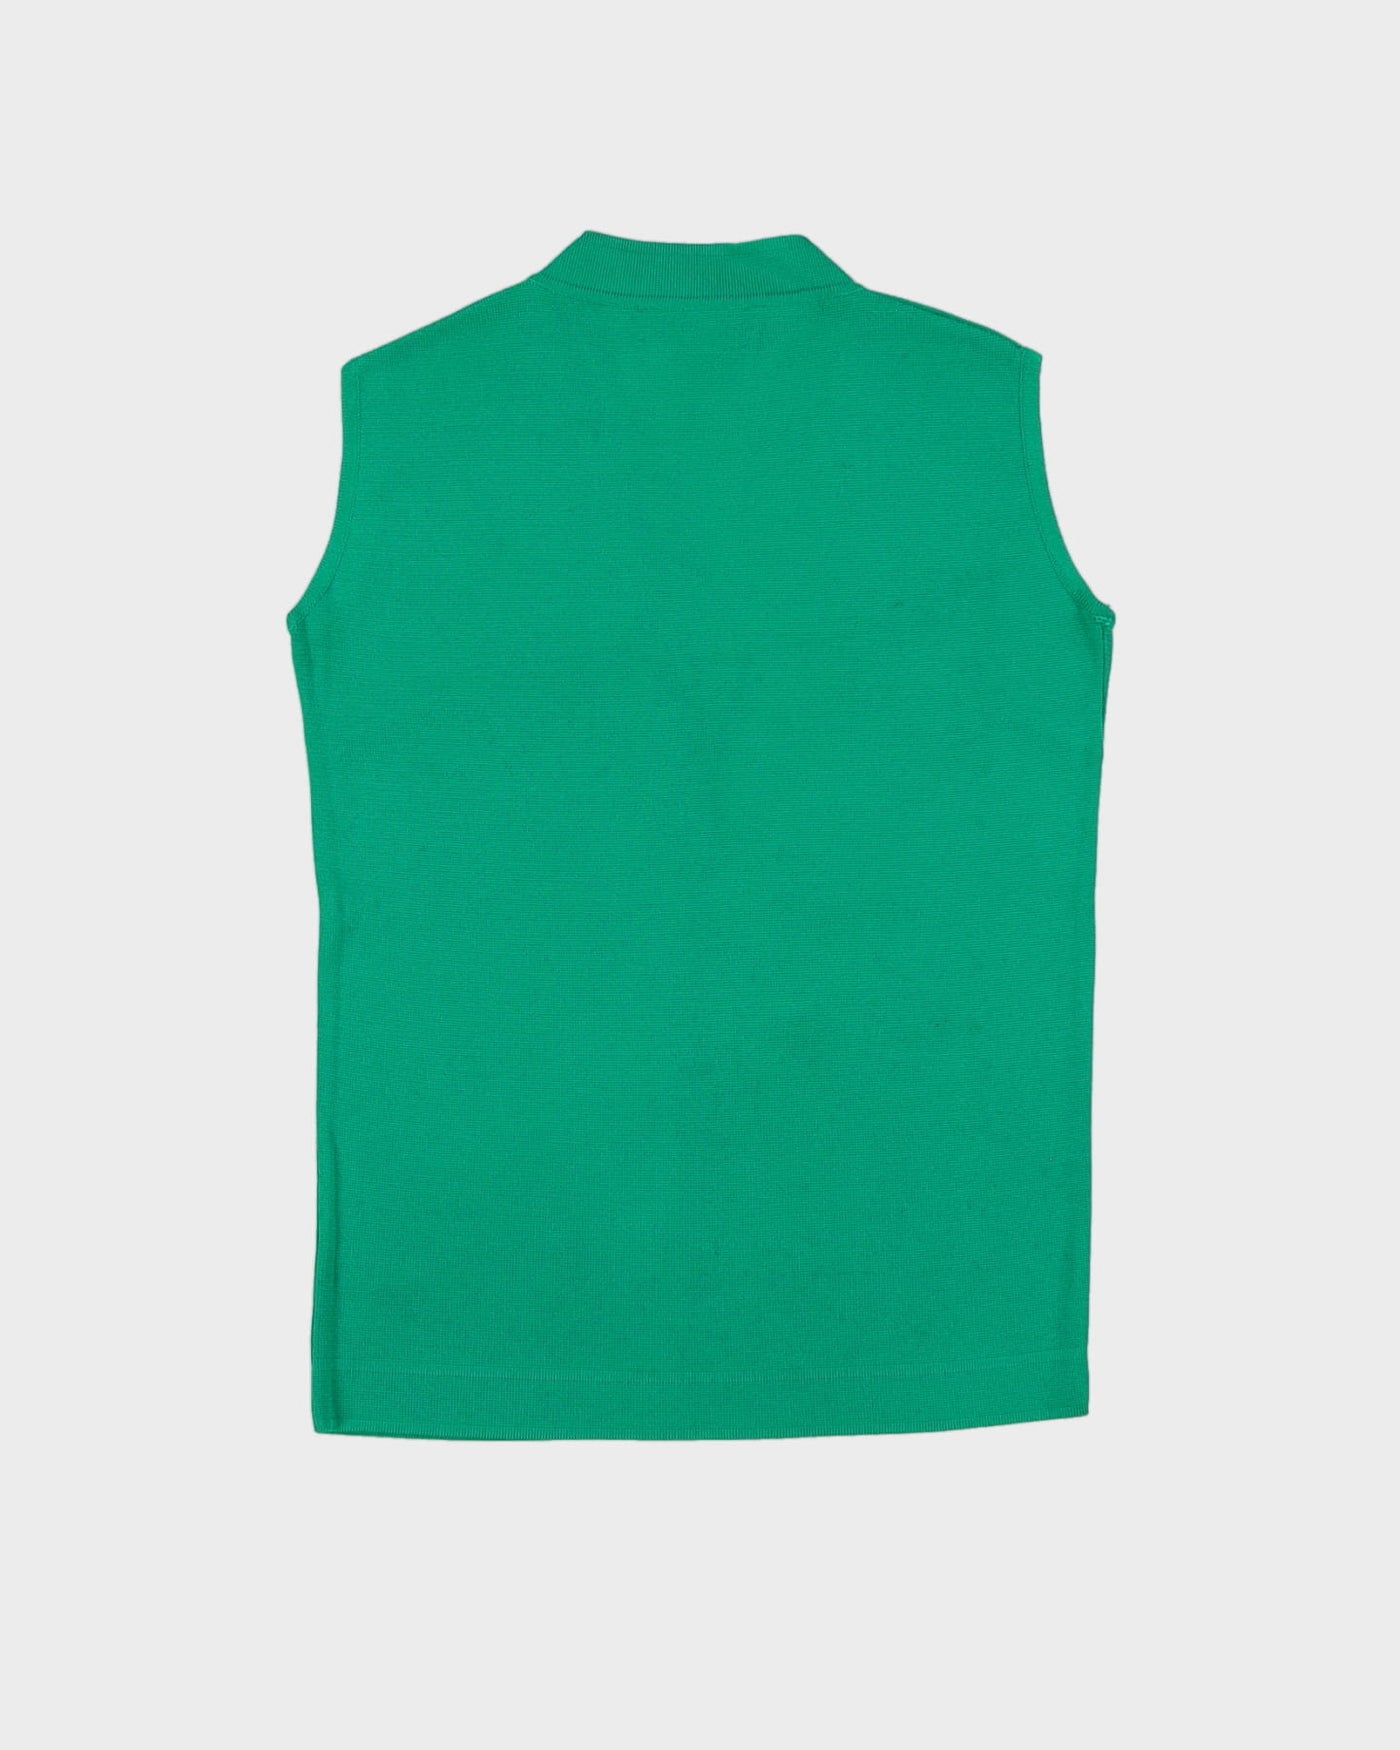 Vintage 1960s Green Knitted Tank Top - S